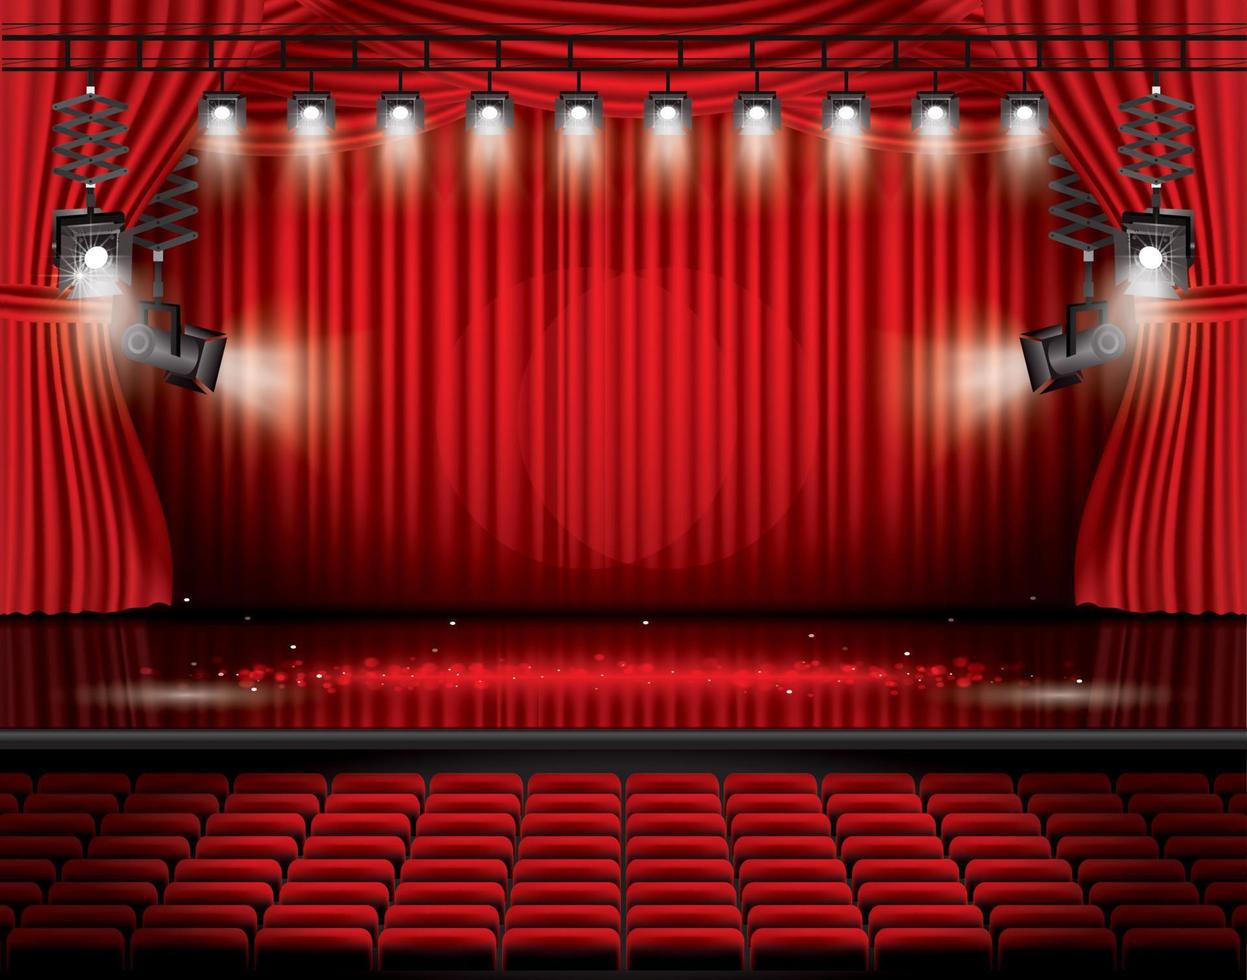 Red Stage Curtain with Spotlights, Seats and Copy Space. vector